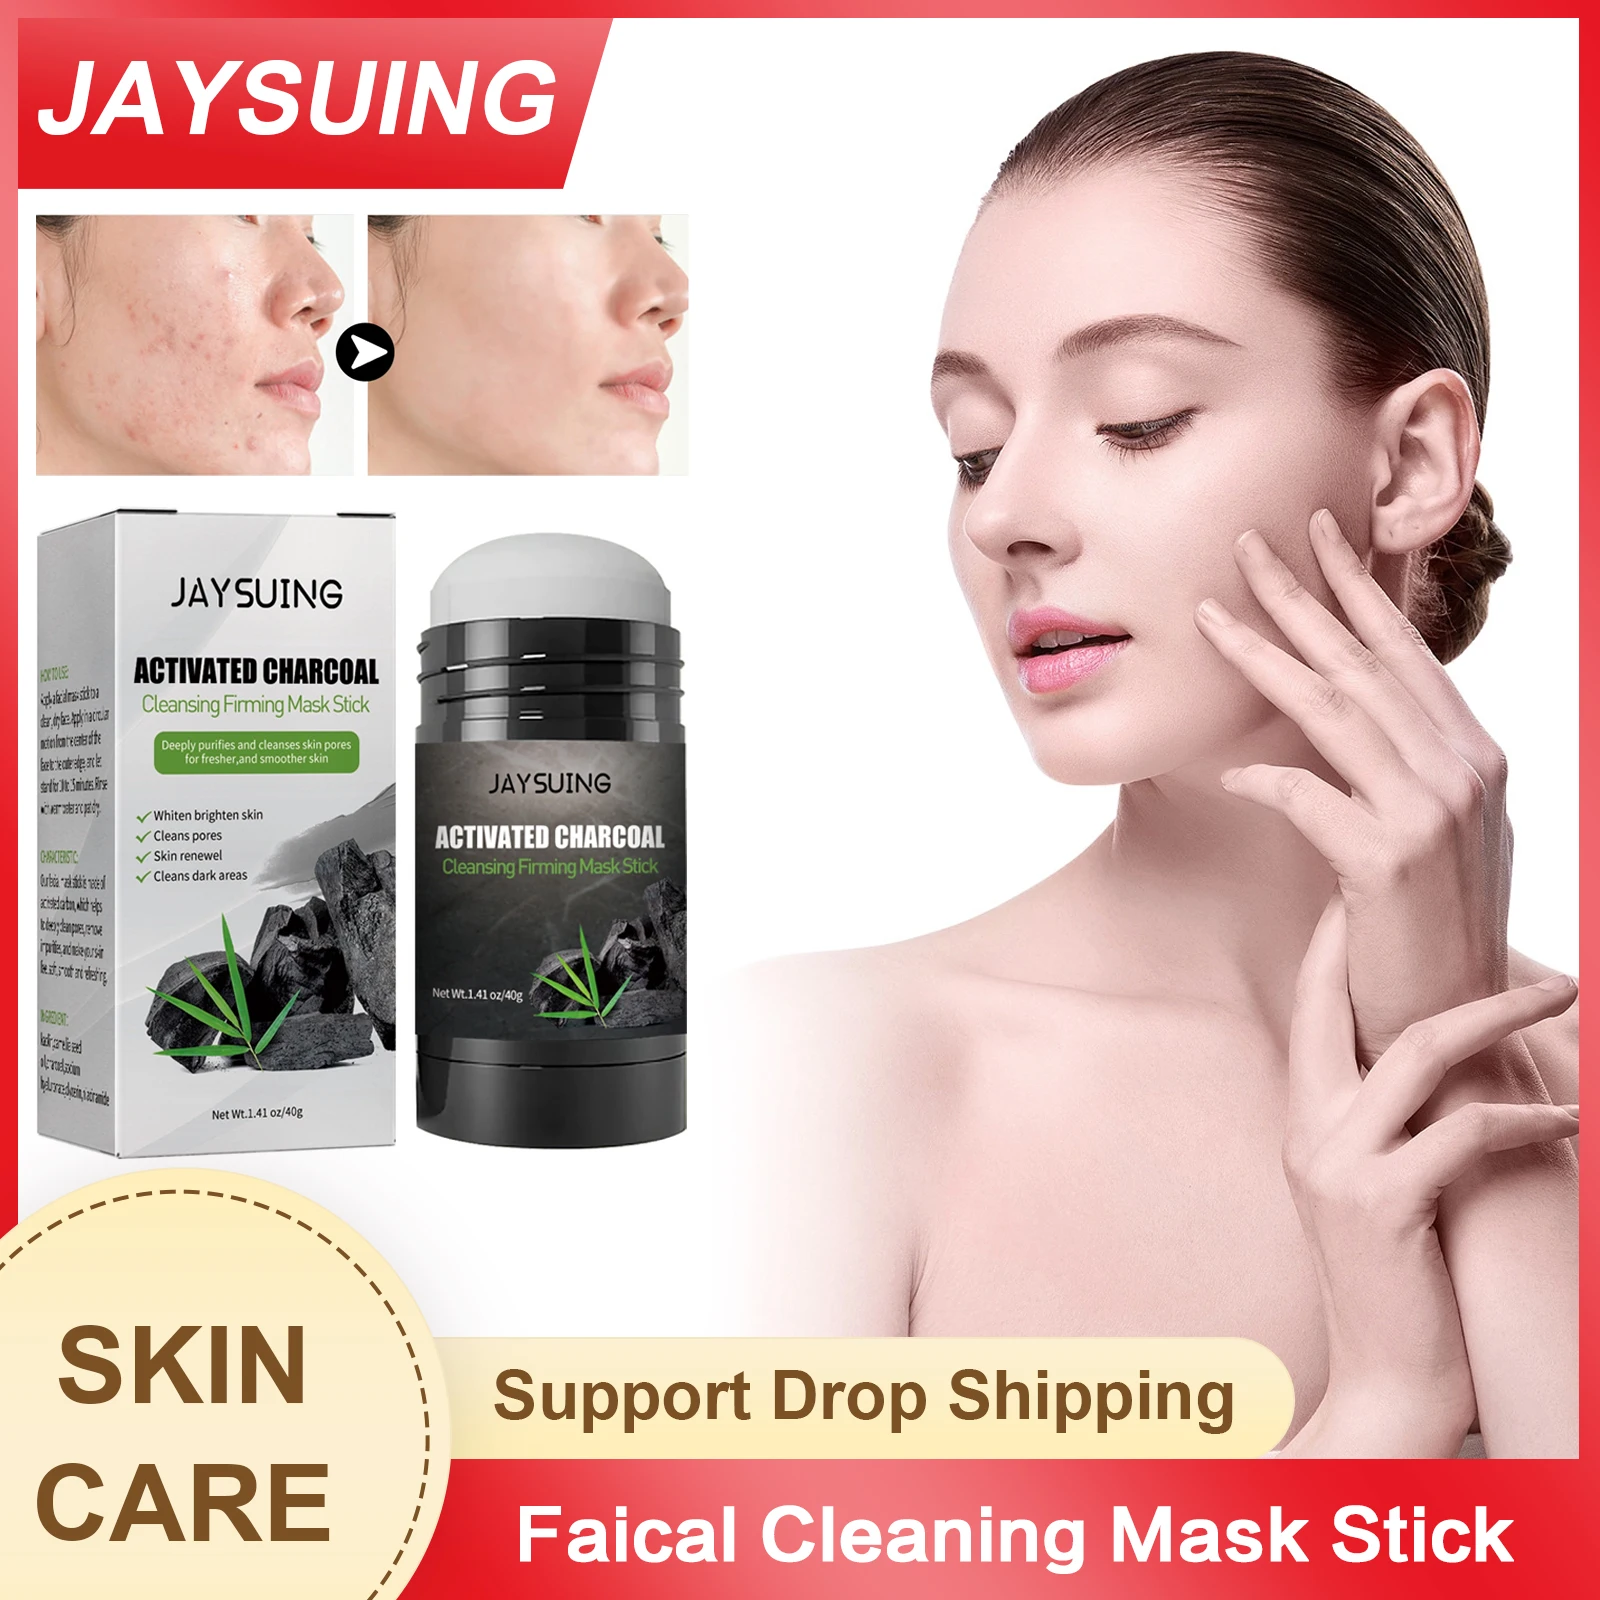 Anti Acne Mask Shrink Pores Blackheads Pimple Remover Oil Control Black Dots Spots Treatment Whitening Purifying Face Clean Mask